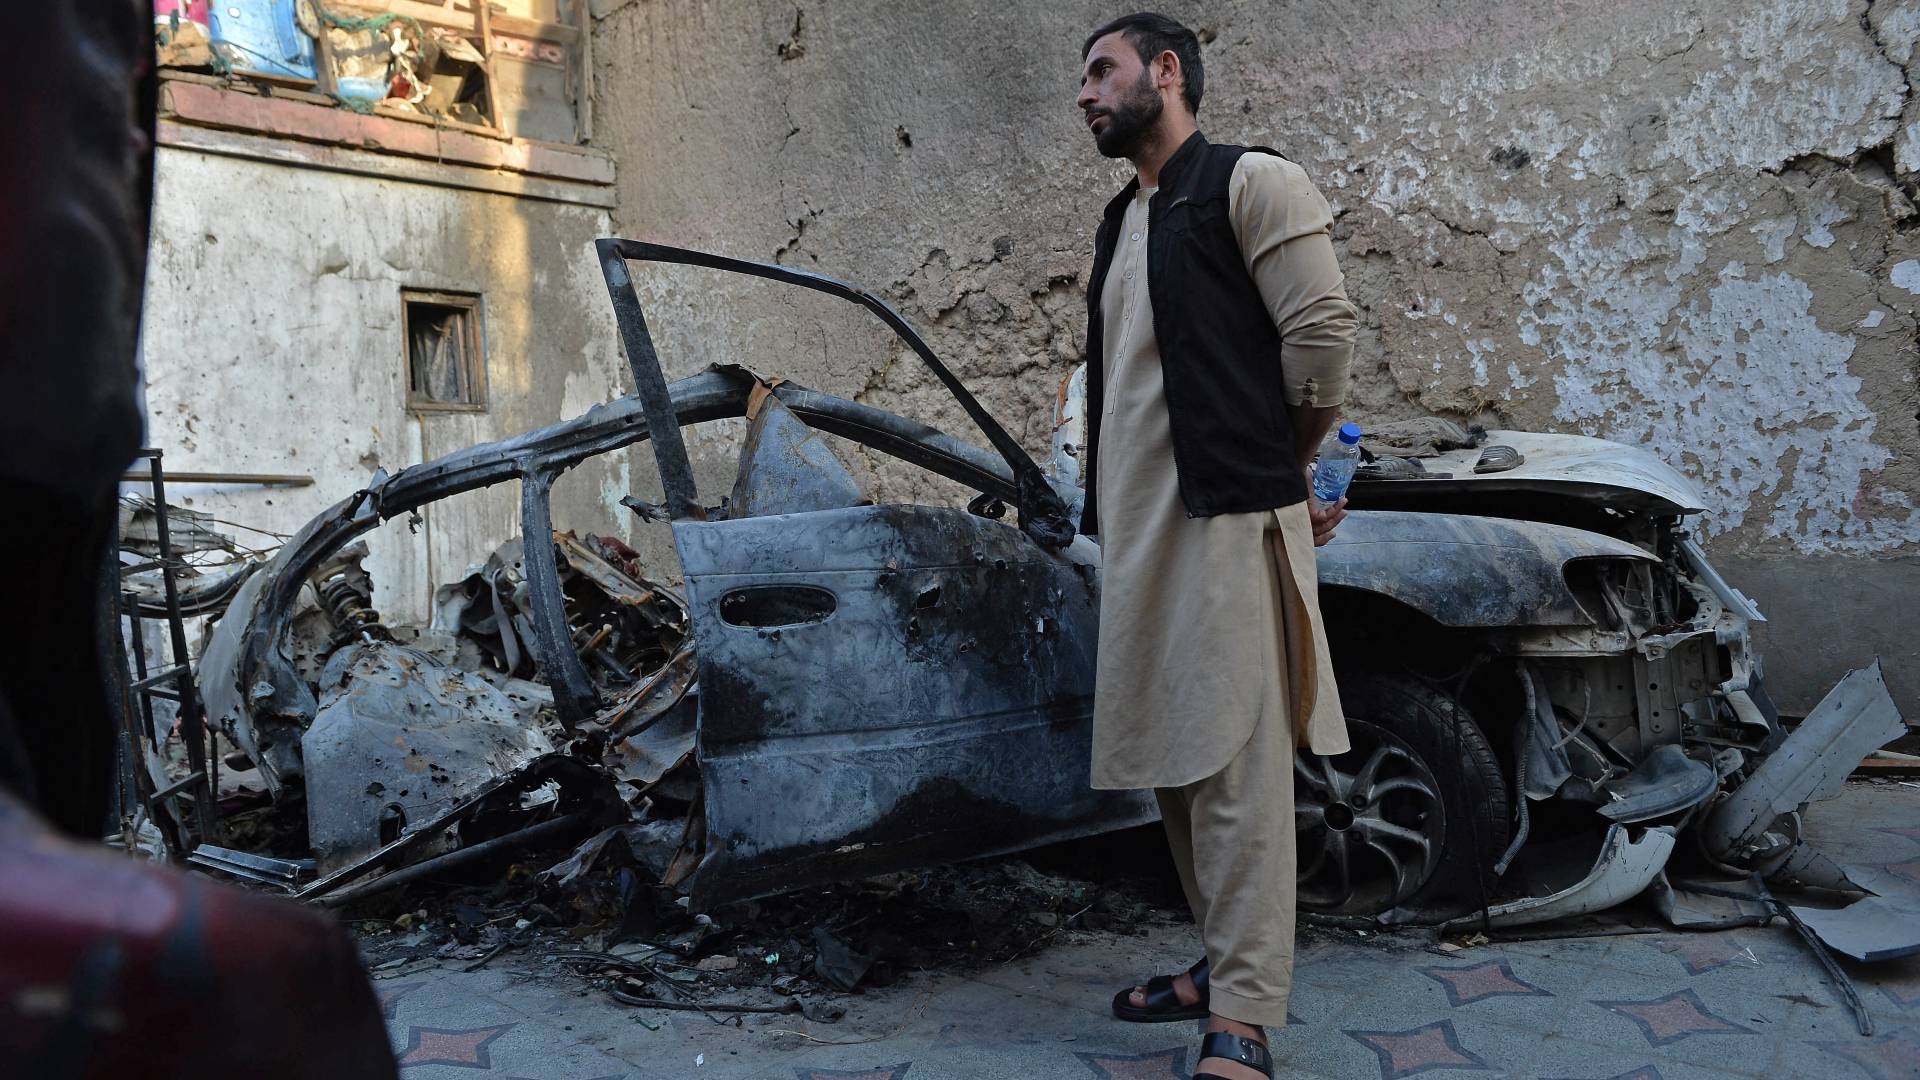 Aimal, brother of Zemari Ahmadi, stands next to the wreckage of a vehicle hit by a US drone strike in the Kwaja Burga neighbourhood of Kabul on 18 September 2021.